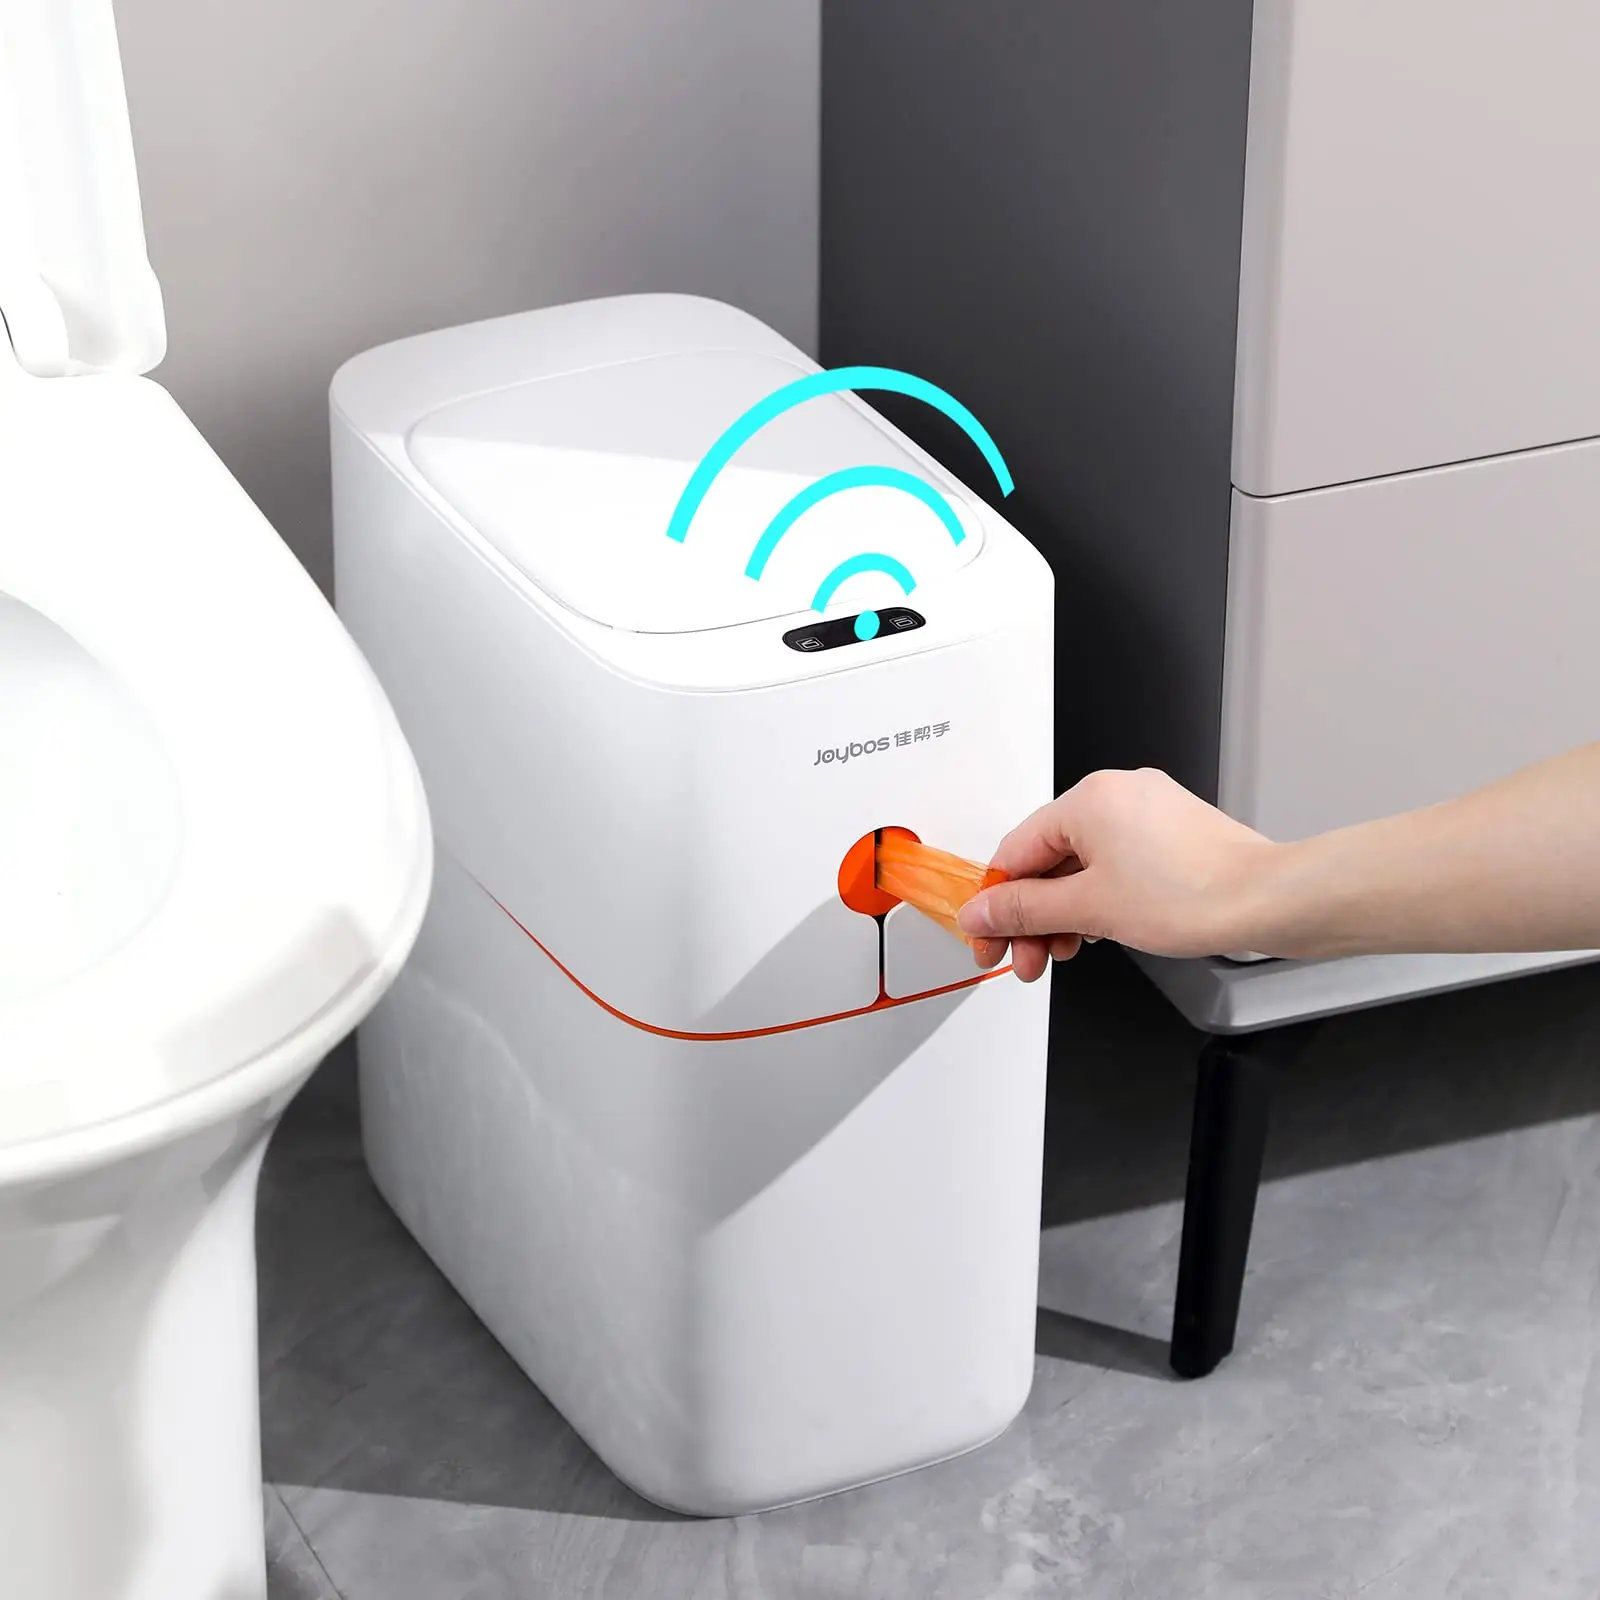 

JOYBOS Smart Induction Trash Can IPX5 Waterproof Automatic Motion Sensor Trash can for Bathroom Bedroom Home Office Odorless